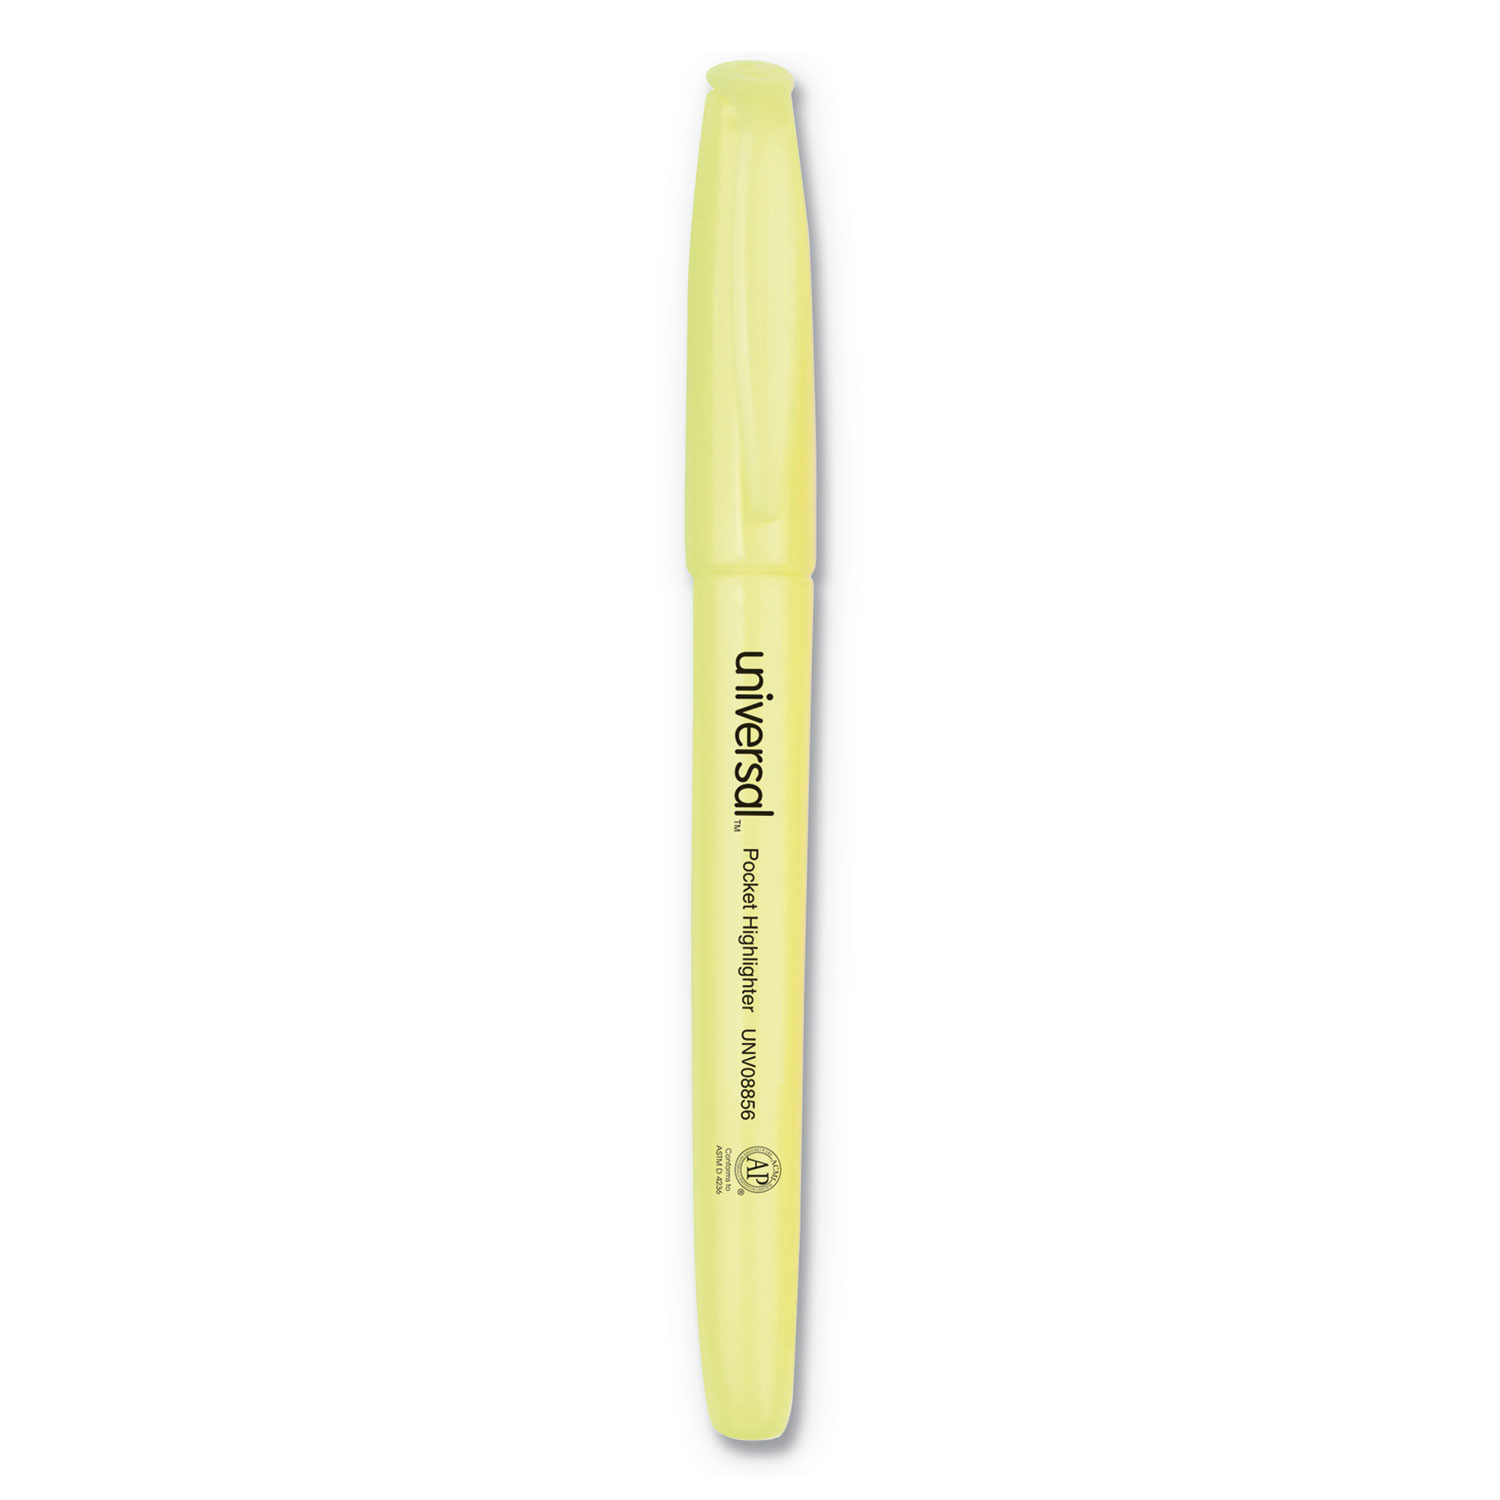  Universal UNV08856 Pocket Highlighters, Chisel Tip, Fluorescent Yellow, 36/Pack (UNV08856) 